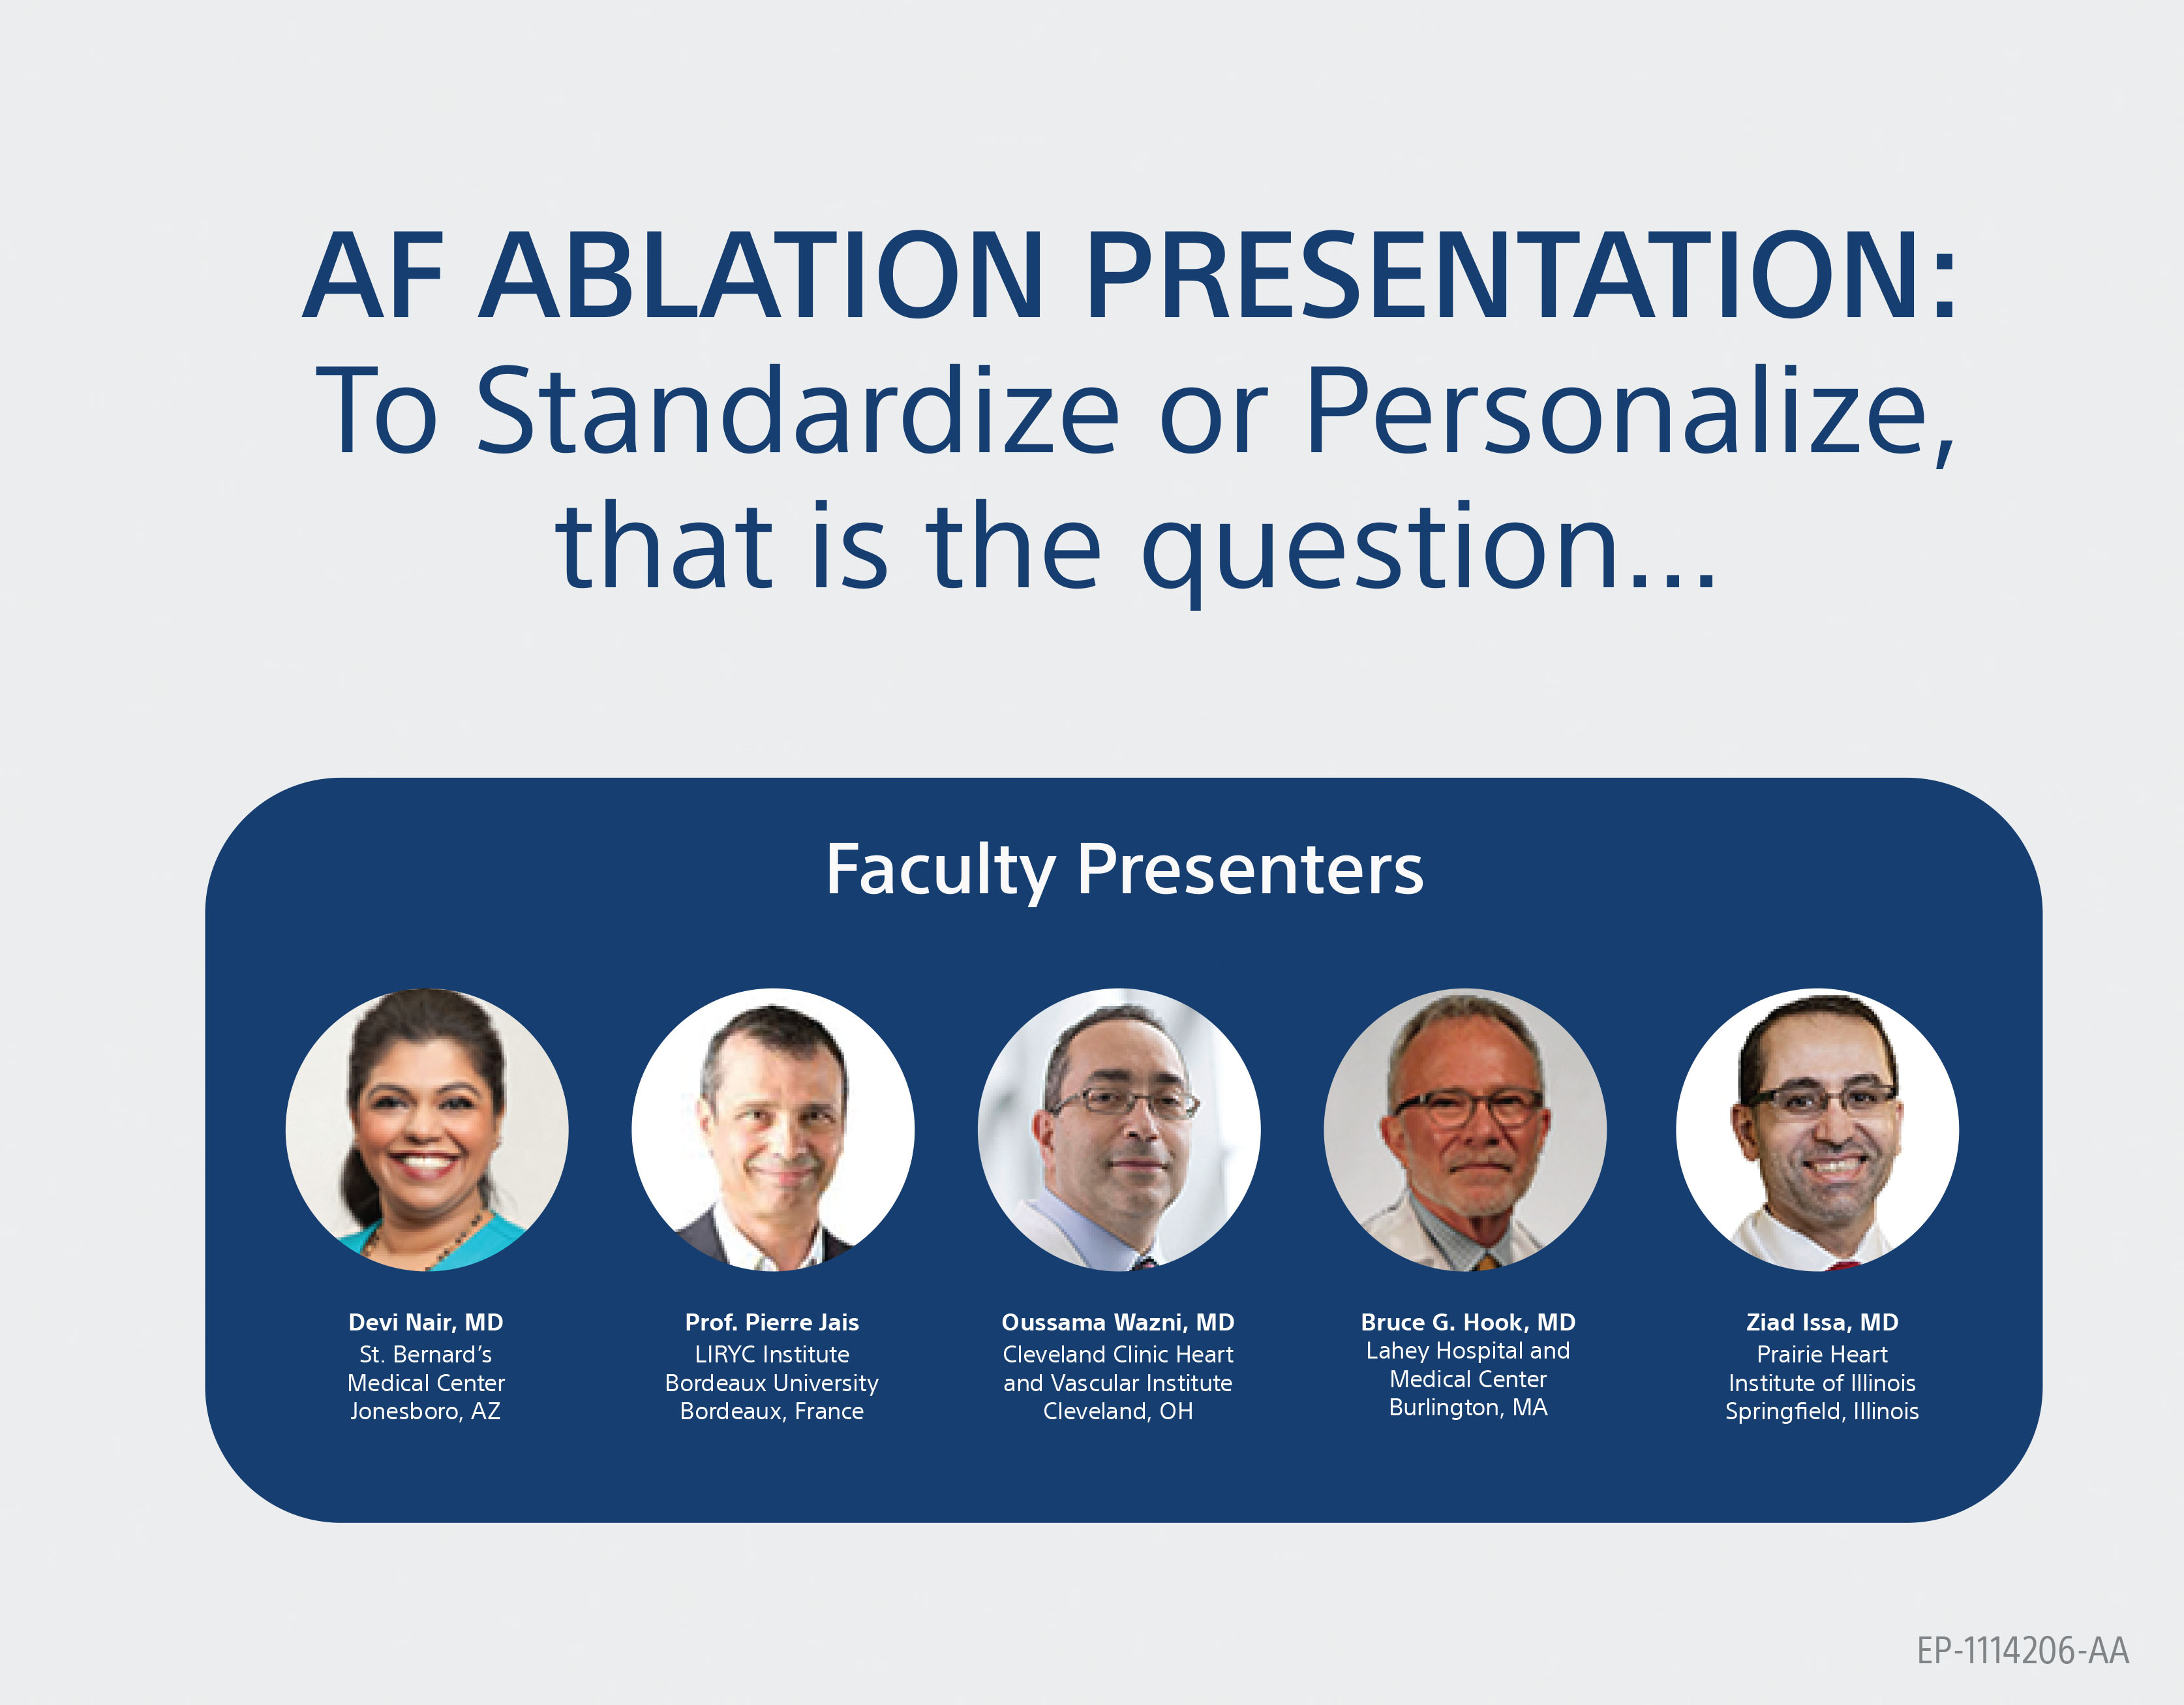 AF Ablation presentation: To standardize or personalize, that is the question.